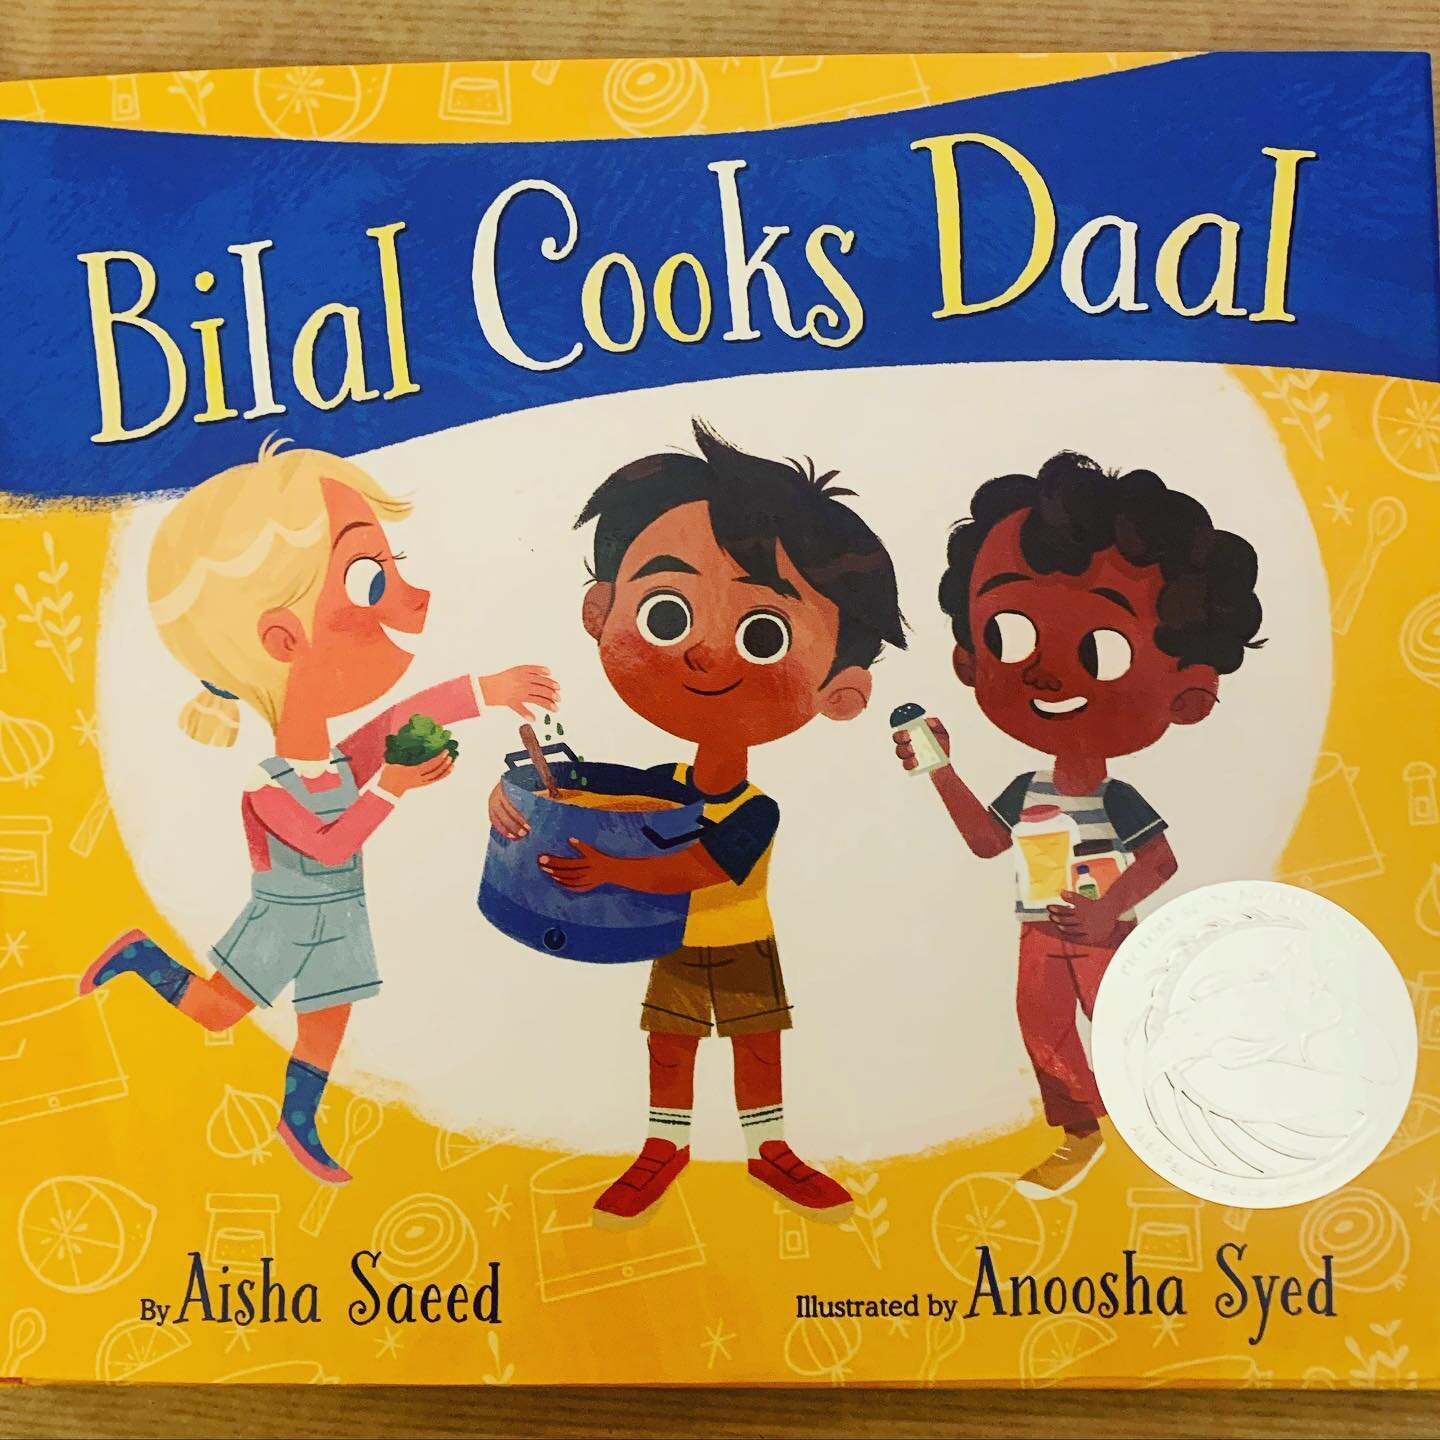 Daal and I have a long standing relationship.....she is my go to comfort food, with roti or rice, you can&rsquo;t really go wrong. So when I first came across this absolutely gorgeous and charming book, beautifully written by @aishacs and equally stu